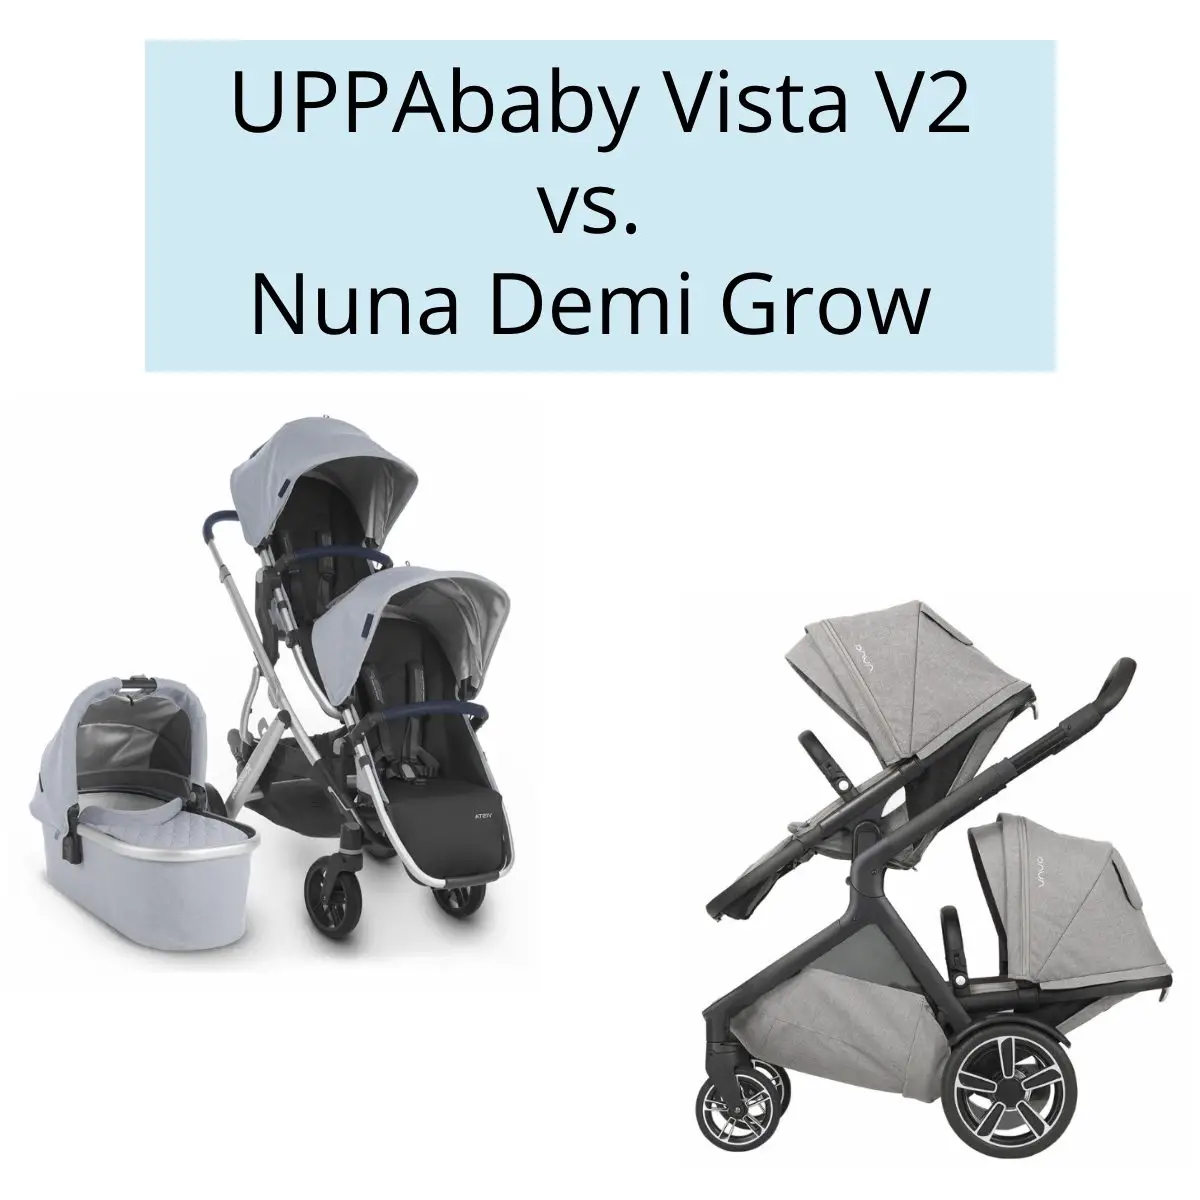 cheapest place to buy uppababy vista